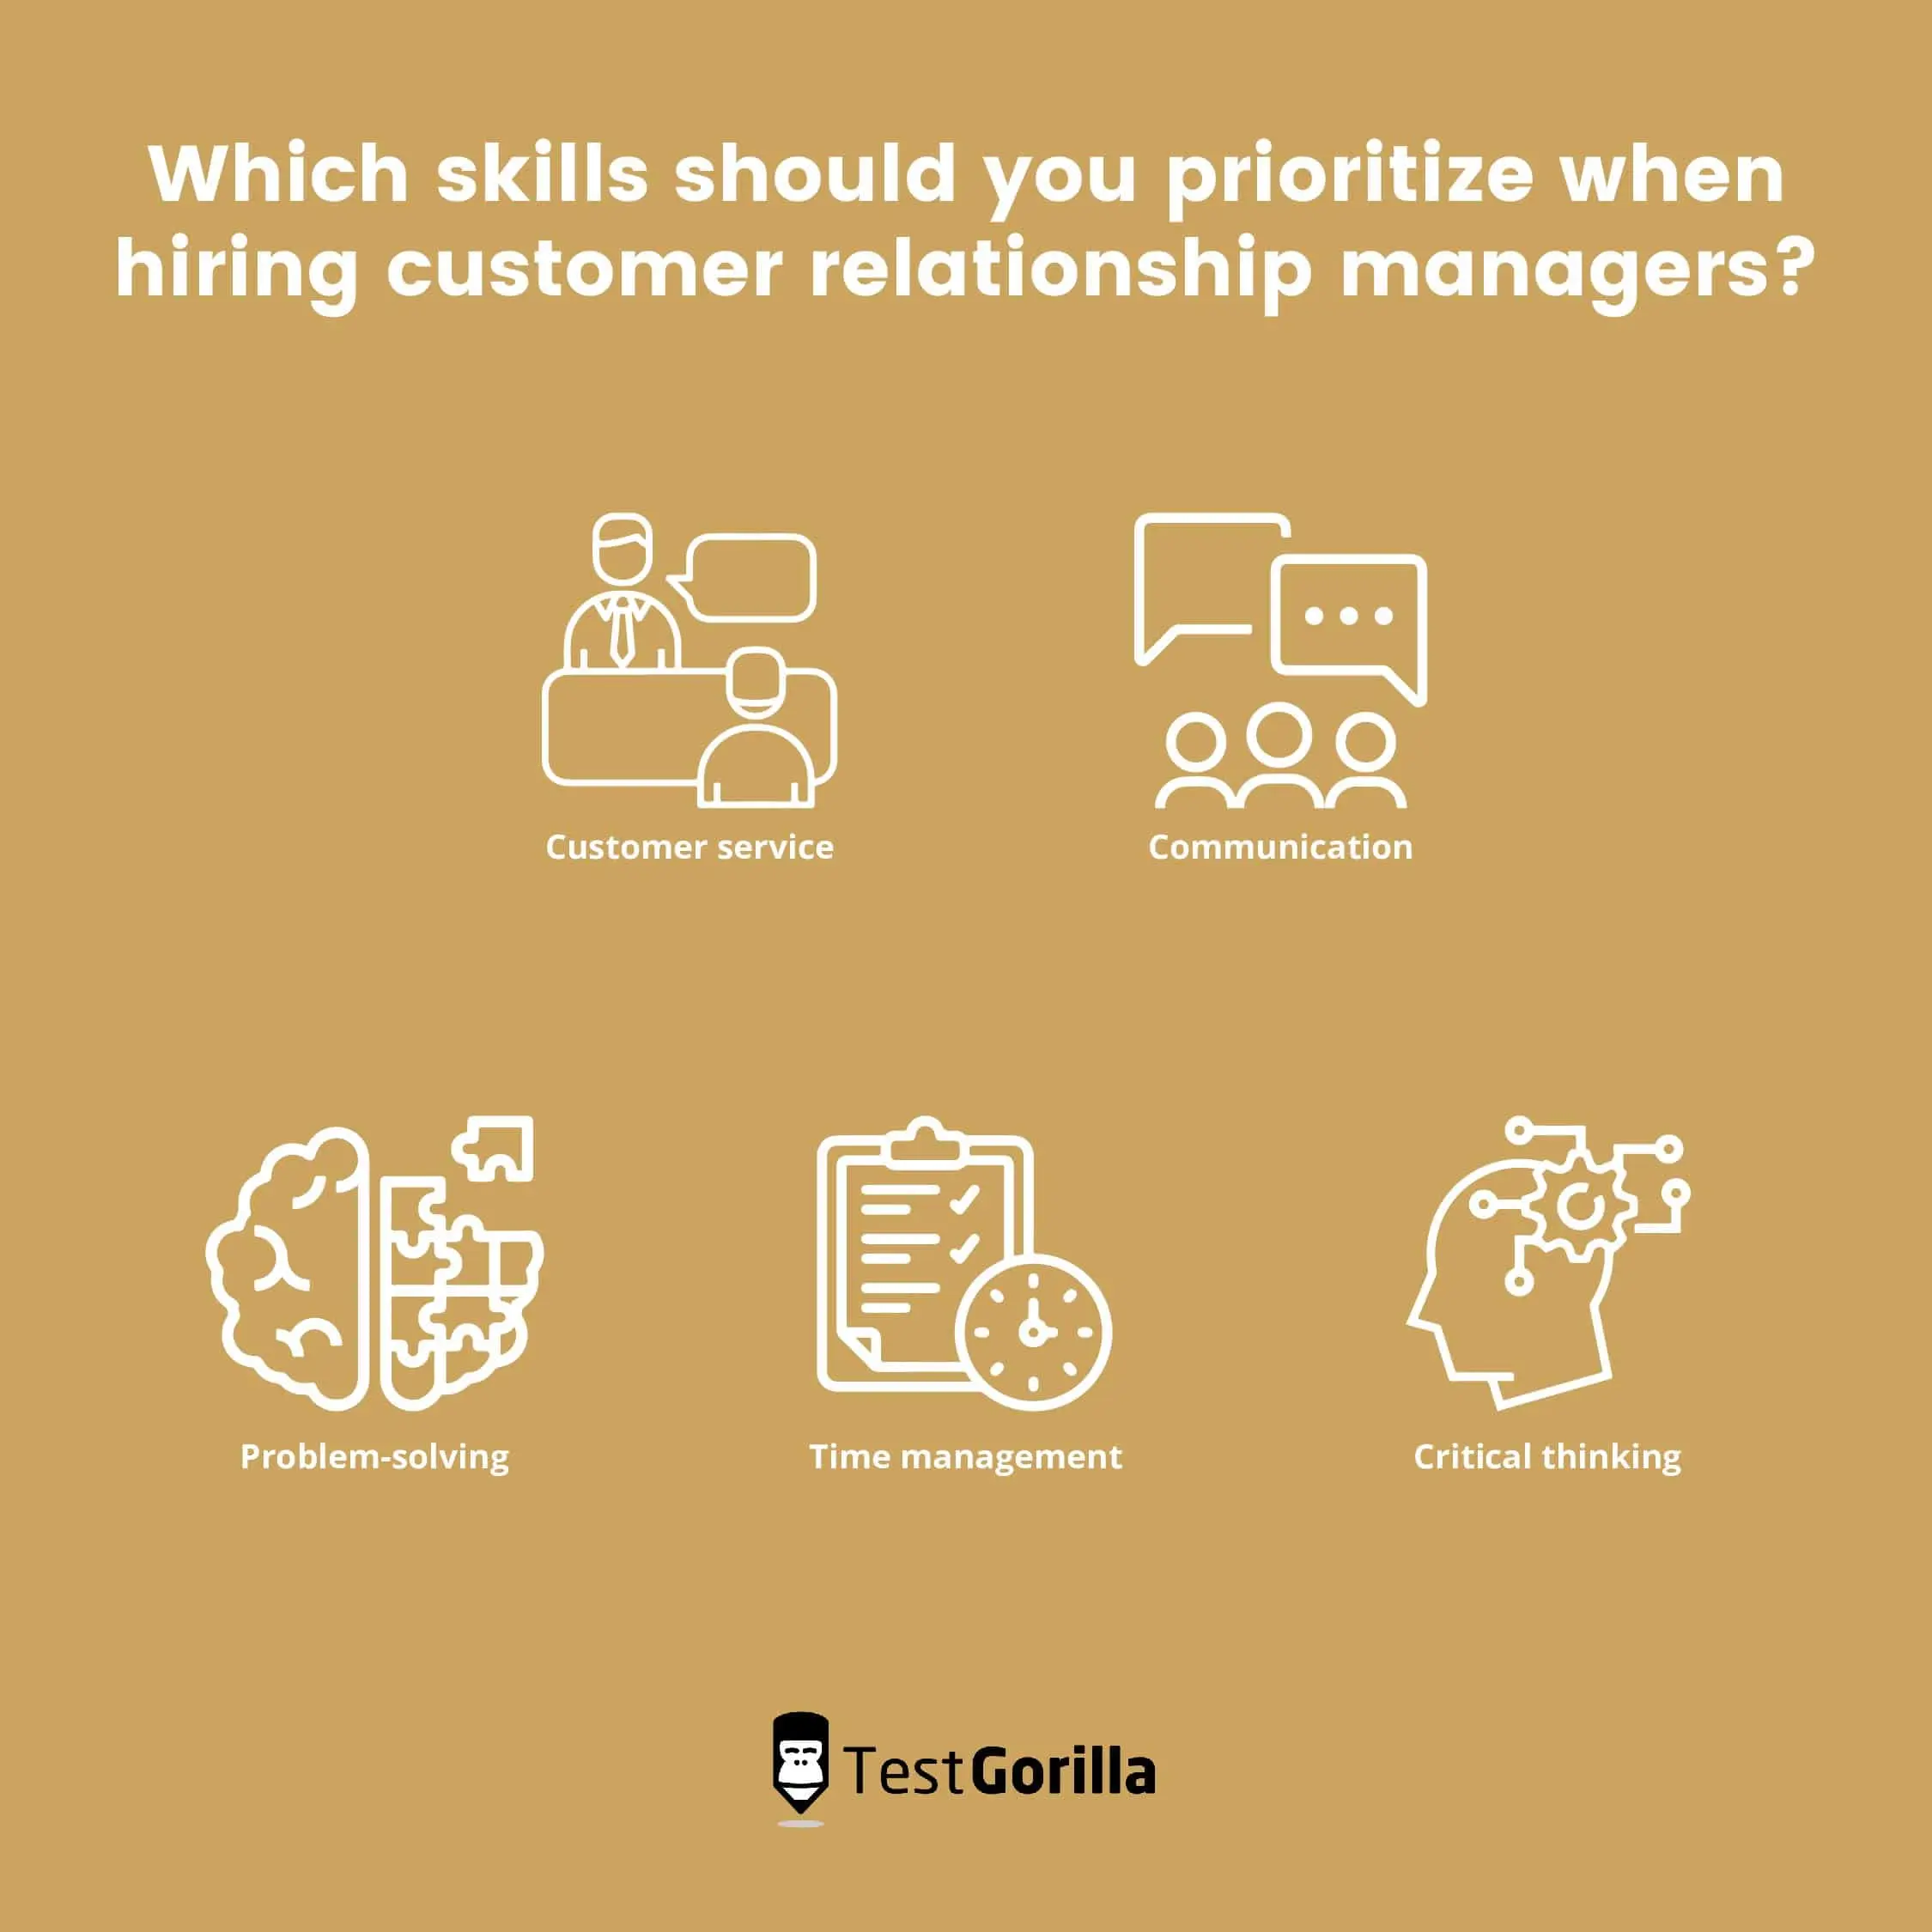 Which skills should you prioritize when hiring customer relationship managers?